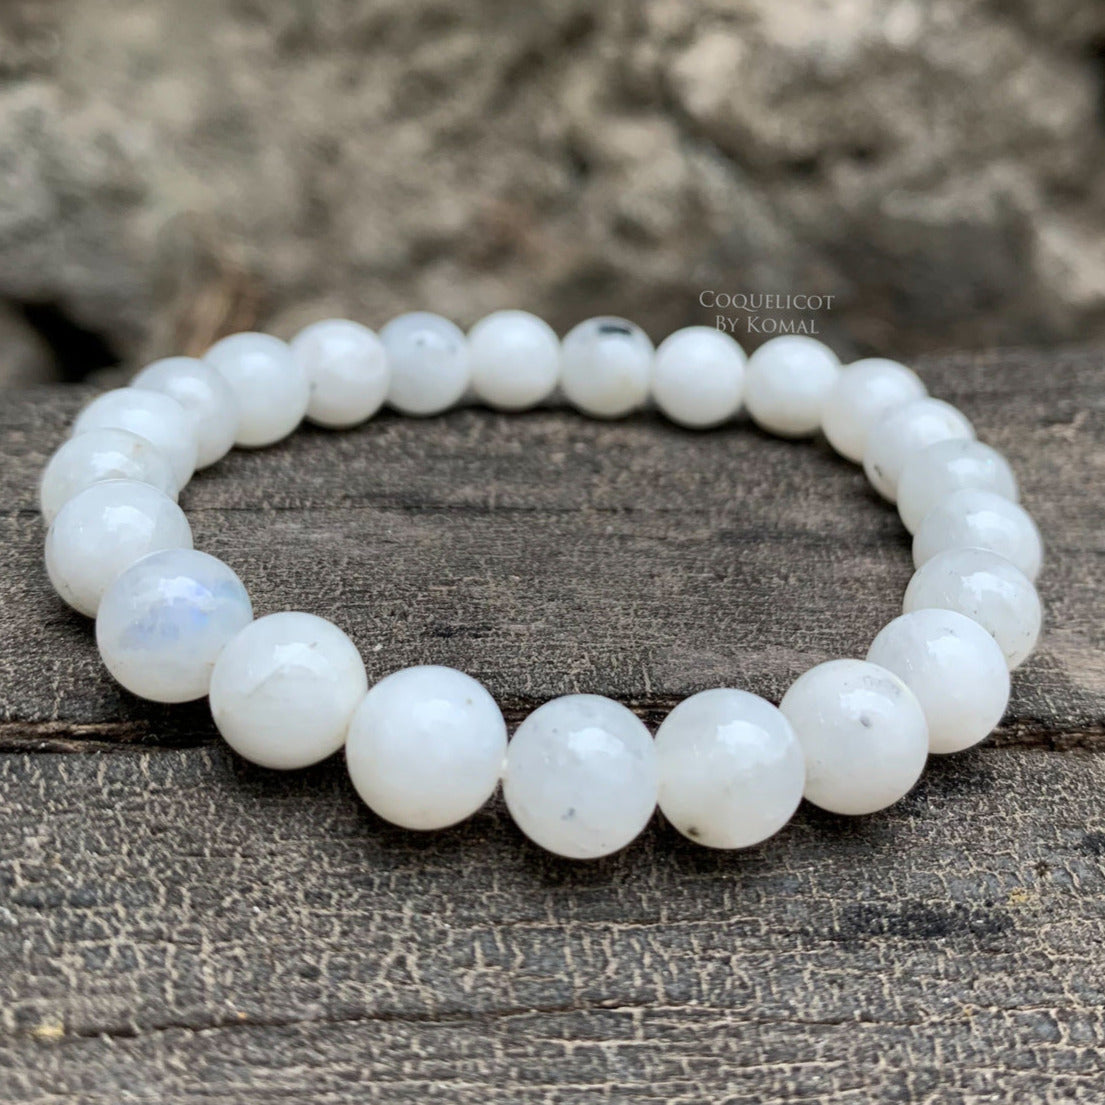 Rainbow Moonstone Bracelet With Rose Gold Filled or Sterling Silver, Beaded Rainbow  Moonstone Jewelry, White Gemstone Stacking Bracelet - Etsy | Rainbow  moonstone jewelry, Moonstone bracelet, Moonstone jewelry